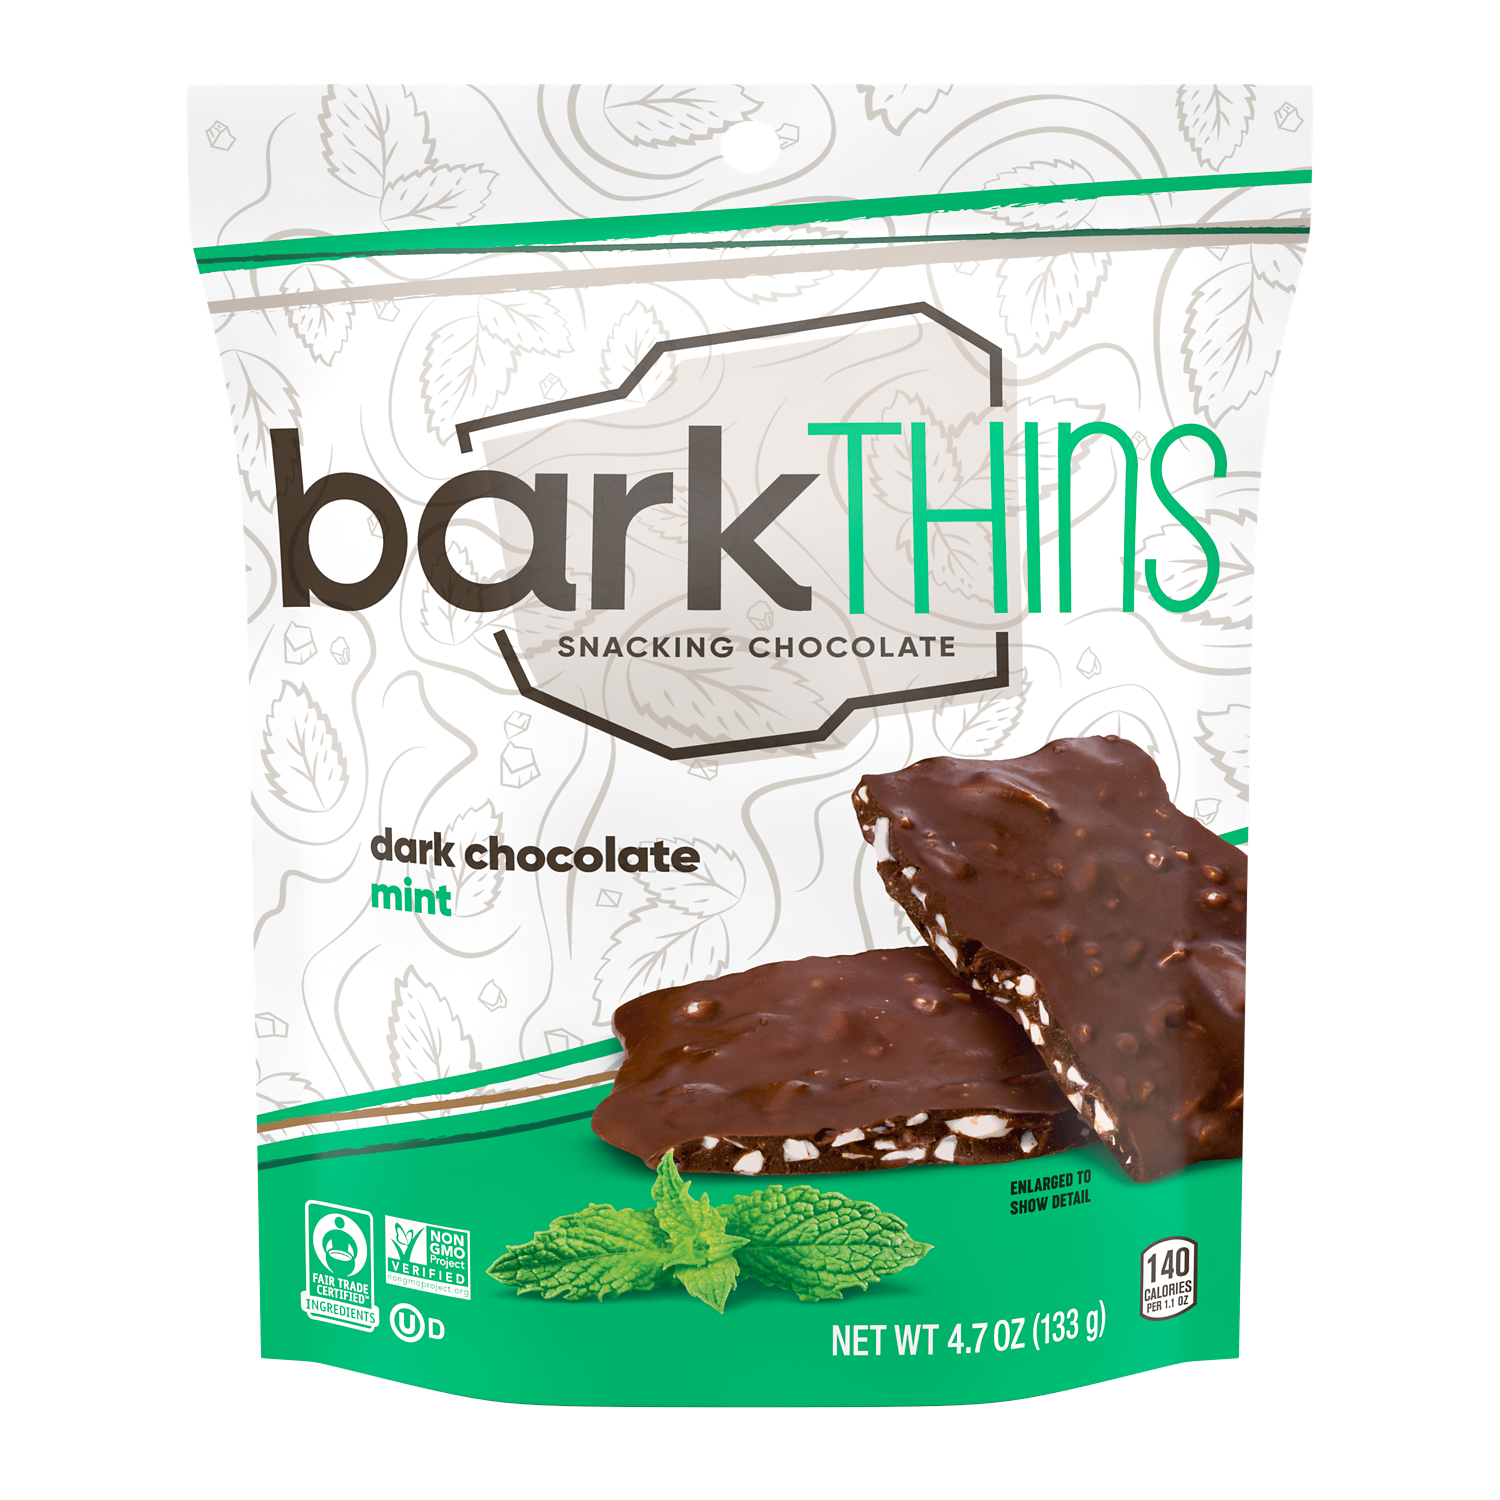 barkTHINS Dark Chocolate Mint Snacking Chocolate, 4.7 oz bag - Front of Package